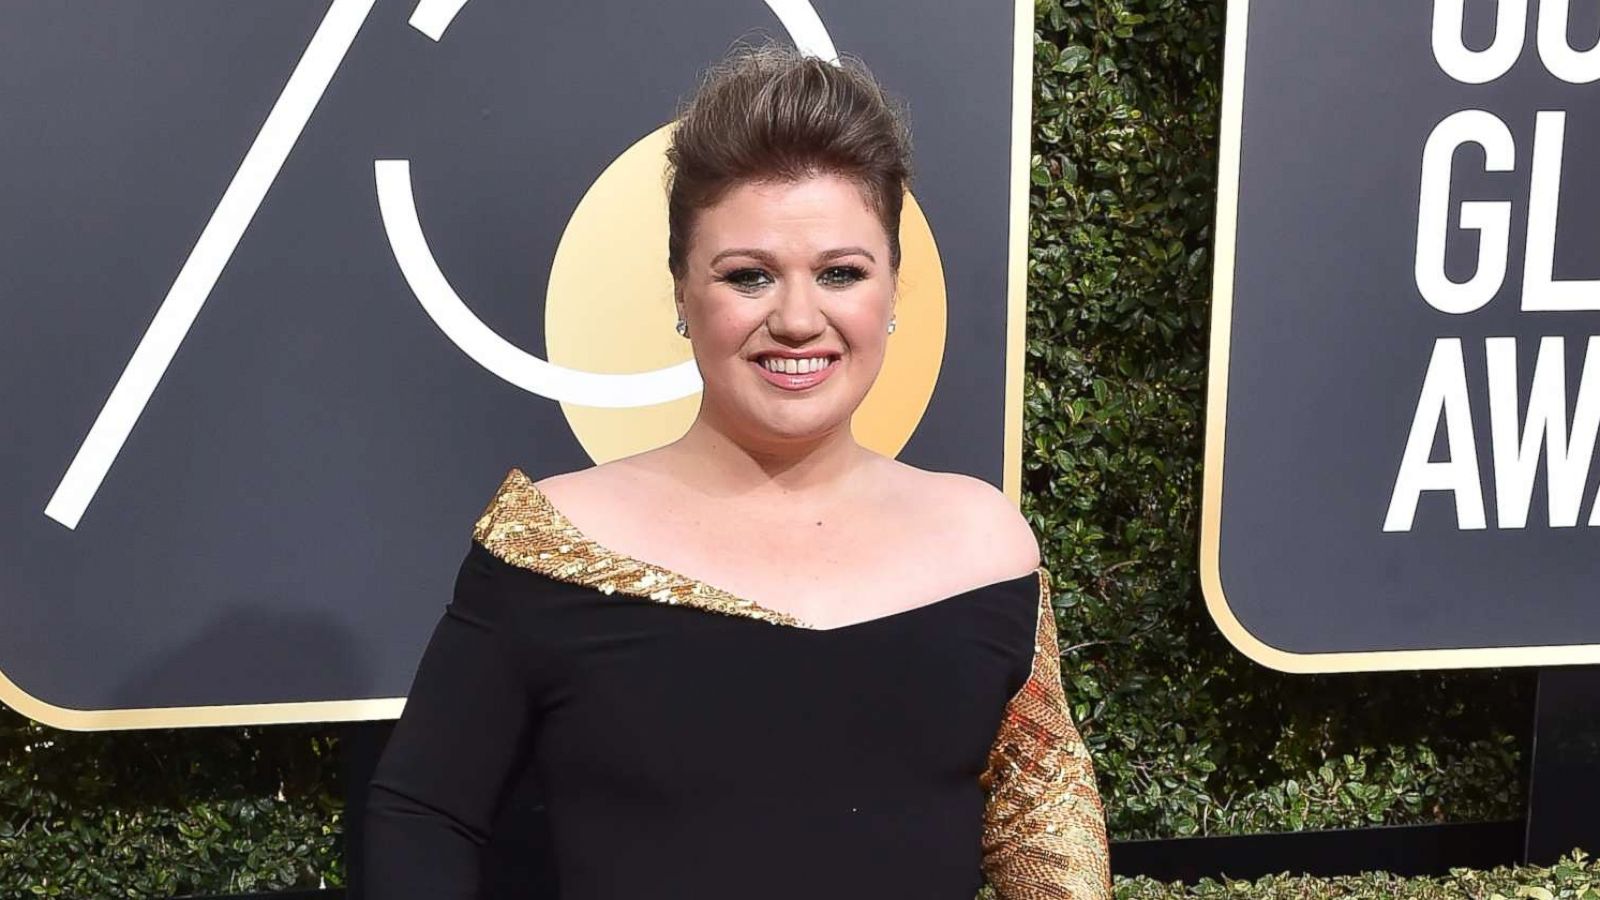 PHOTO: Kelly Clarkson attends the 75th Annual Golden Globe Awards at The Beverly Hilton Hotel on Jan. 7, 2018 in Beverly Hills, Calif.